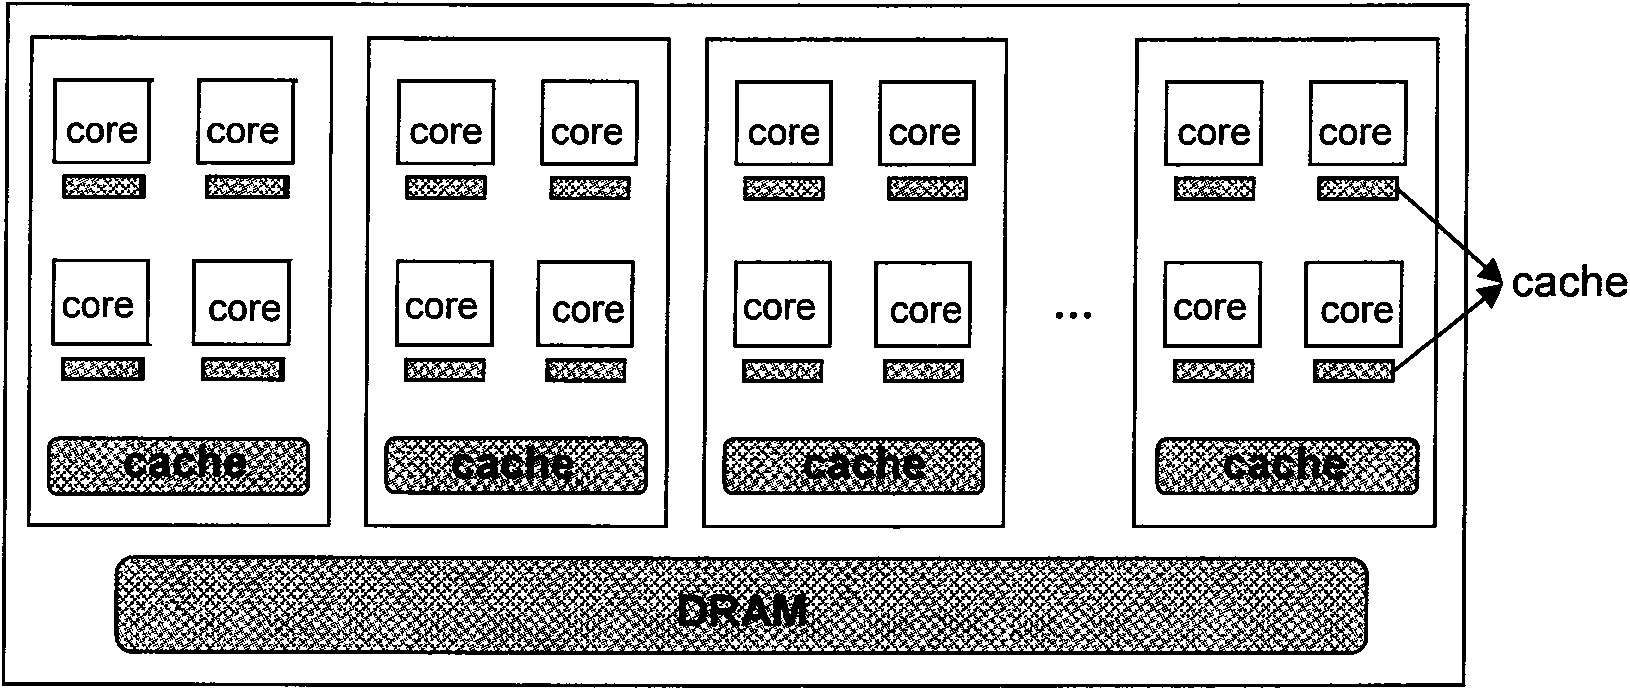 Large-scale data parallel computation method with many-core structure